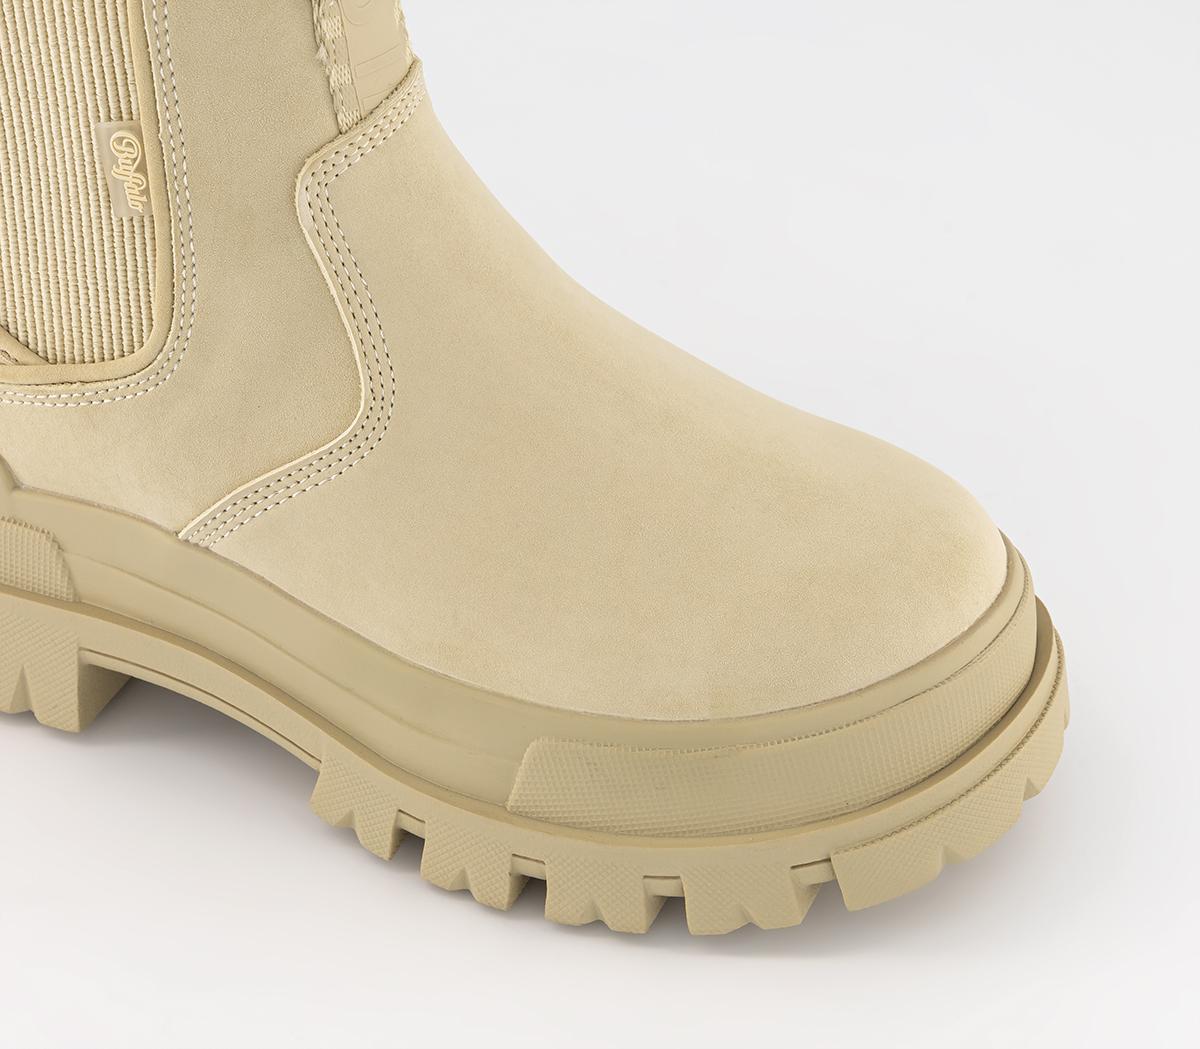 Buffalo Aspha Chelsea Boots Cream - Women's Ankle Boots